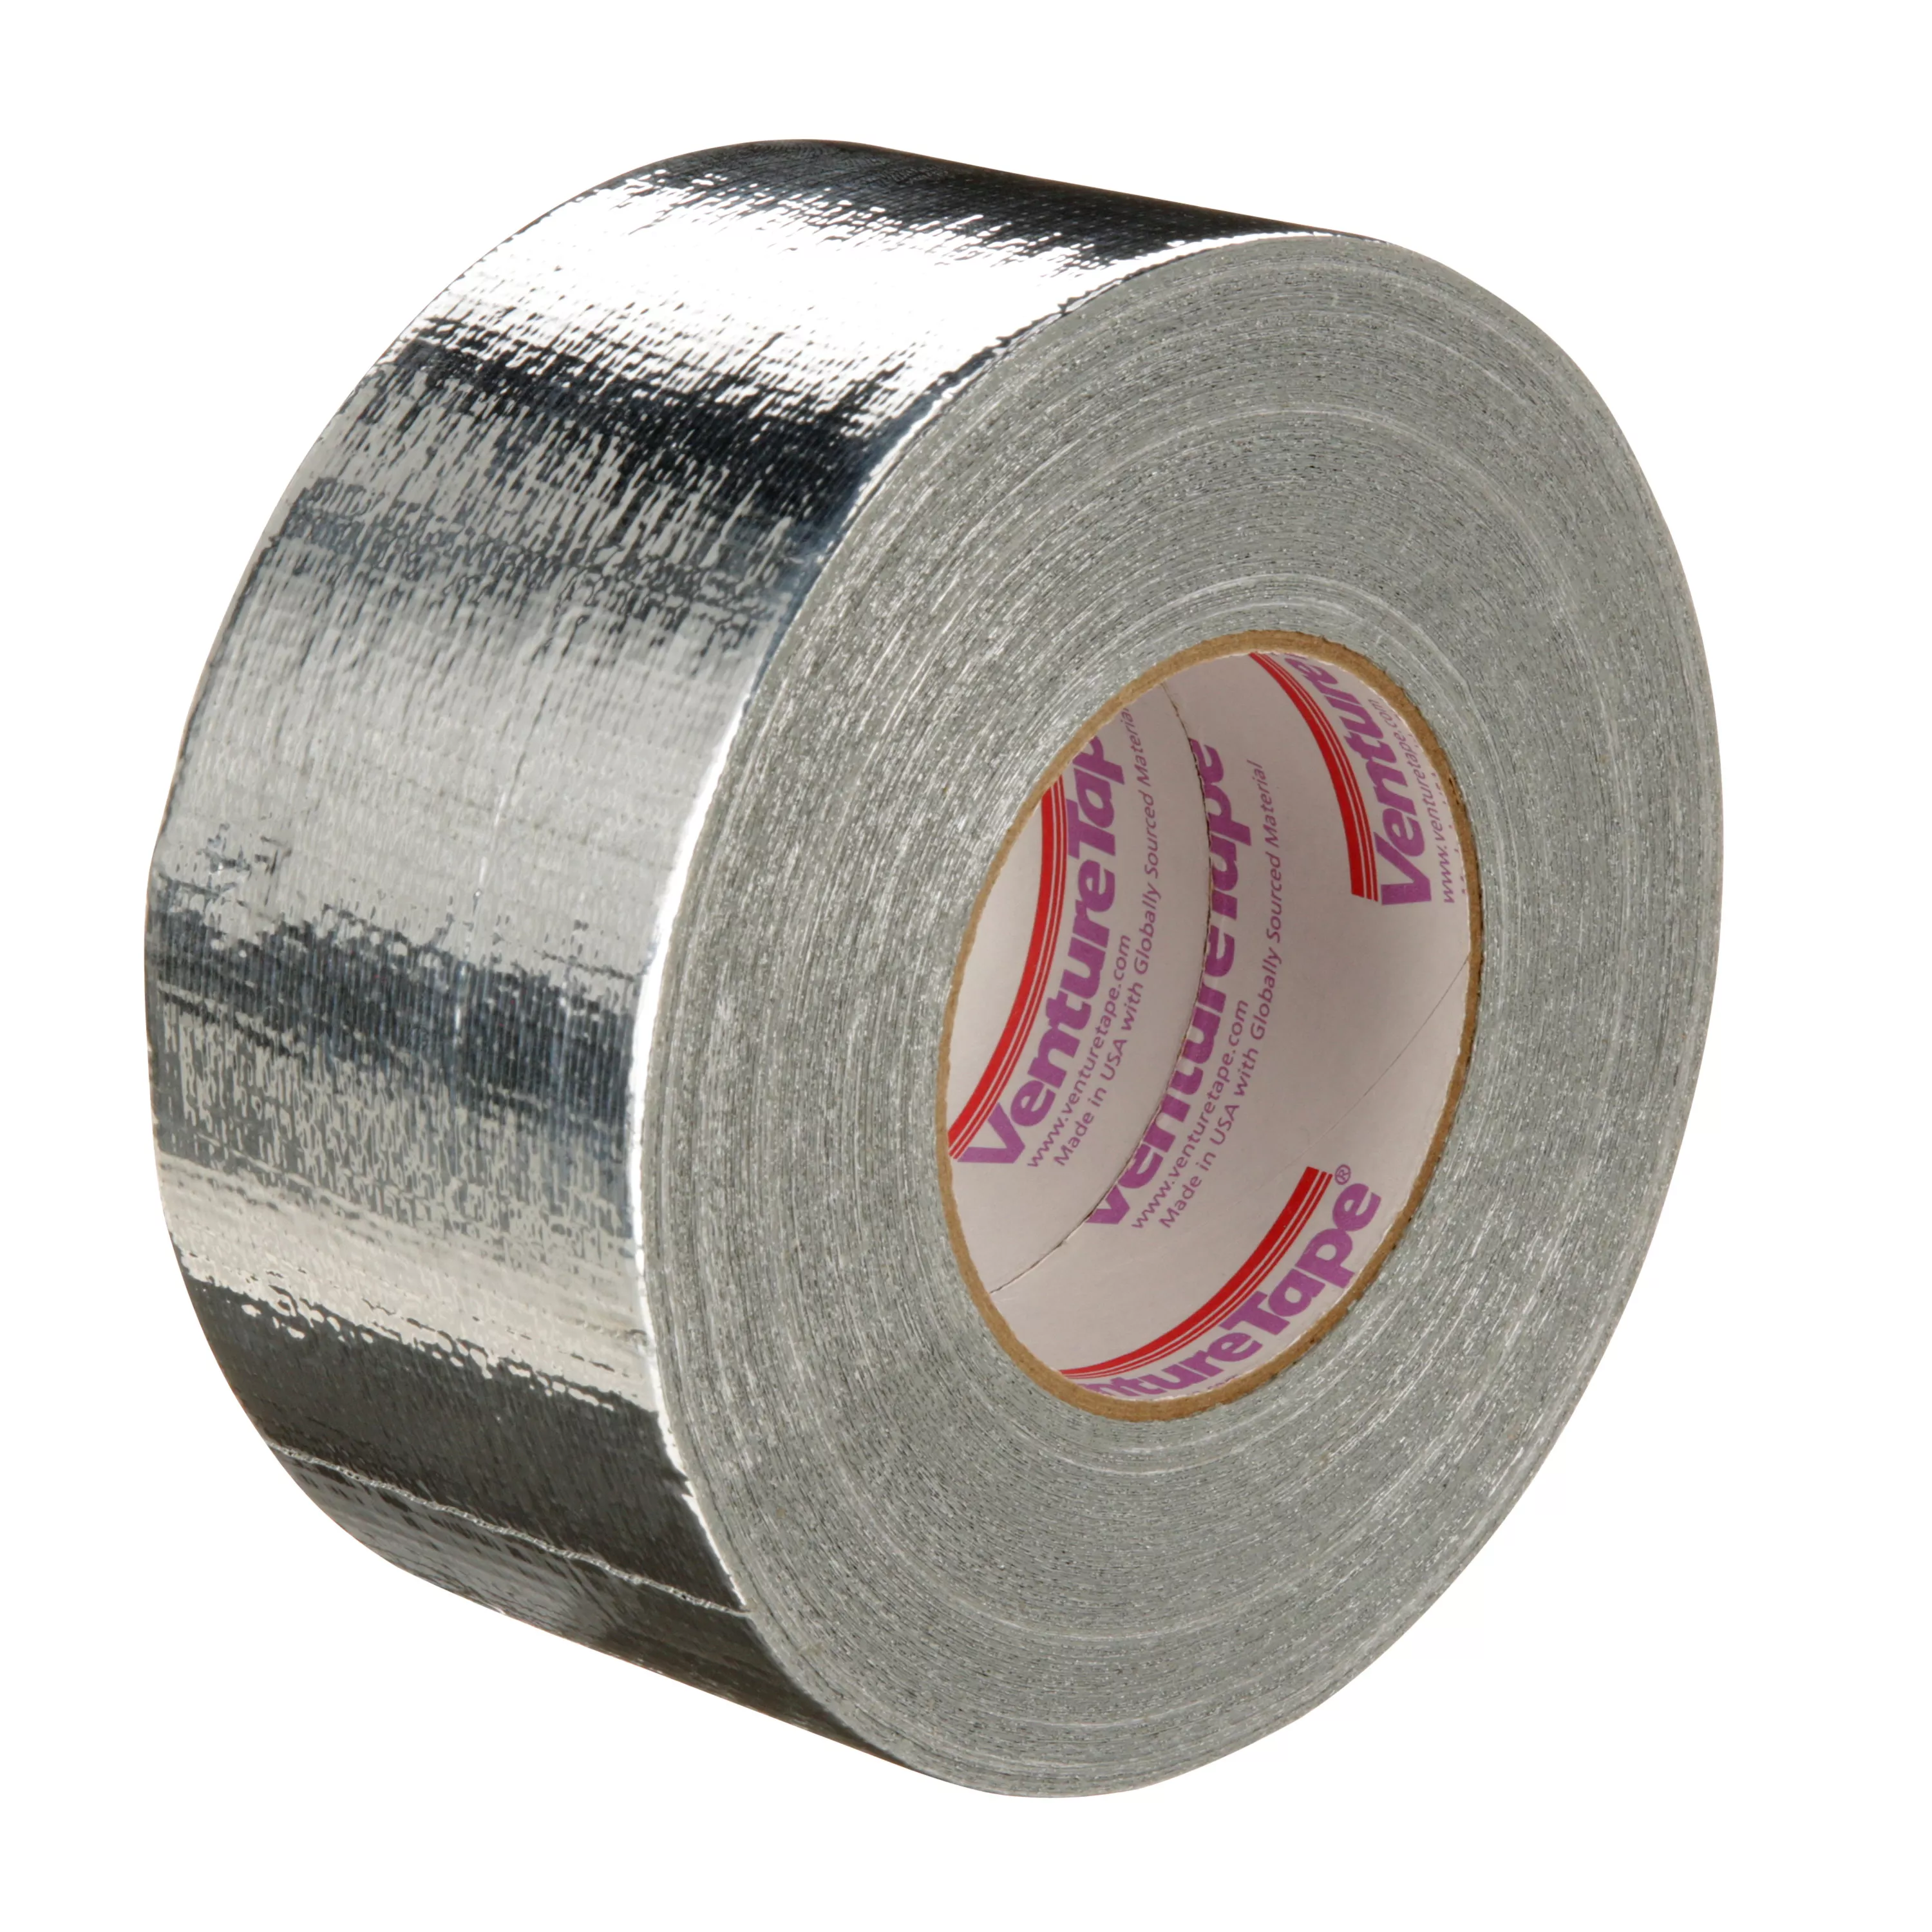 3M™ Venture Tape™ Metallized Cloth Duct Tape 1502, Silver, 72 mm x 55 m
(2.83 in x 60.1 yd), 16/Case